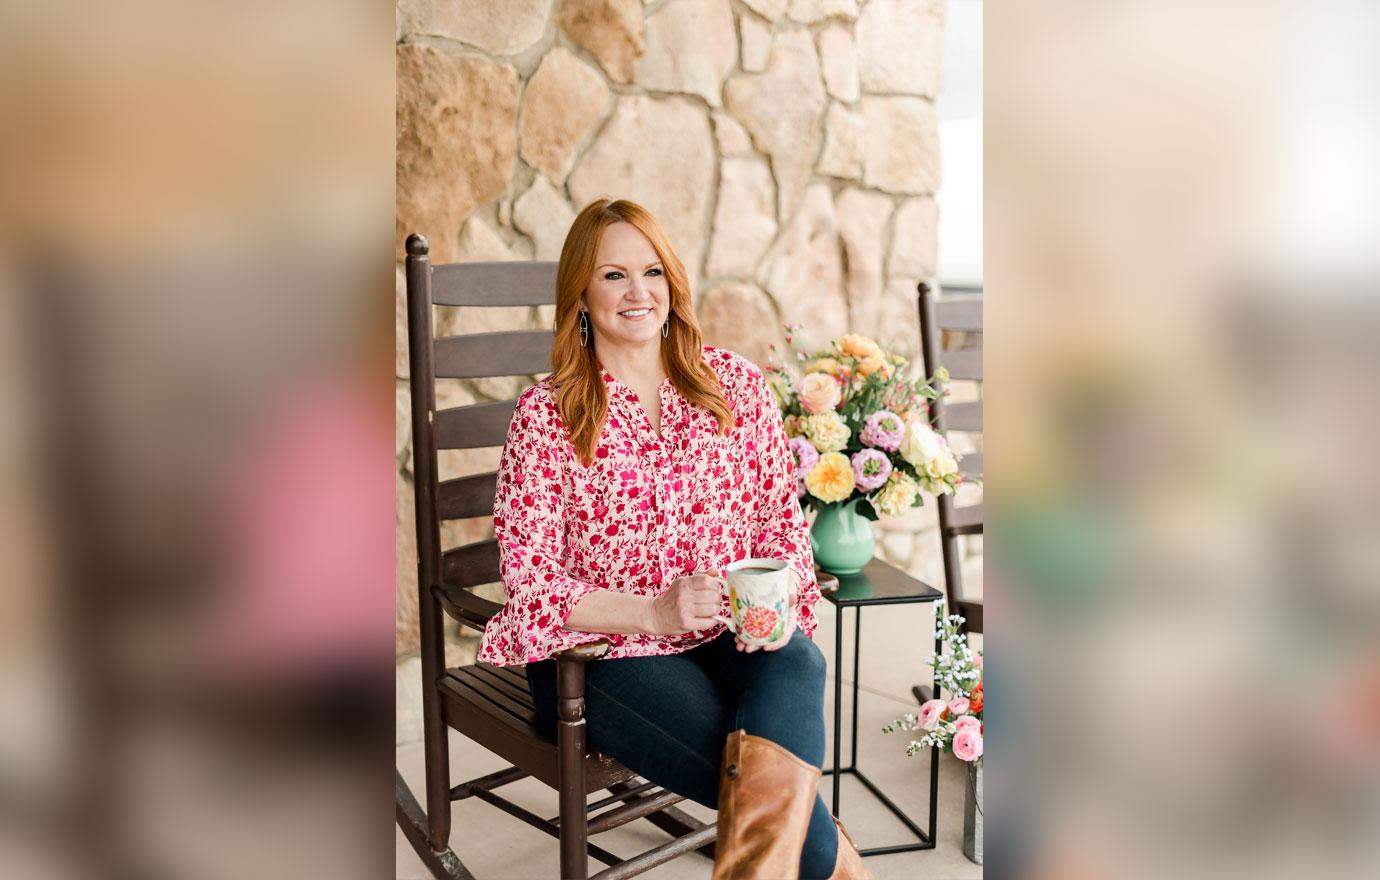 Ree Drummond Just Launched a Pioneer Woman Clothing Line at